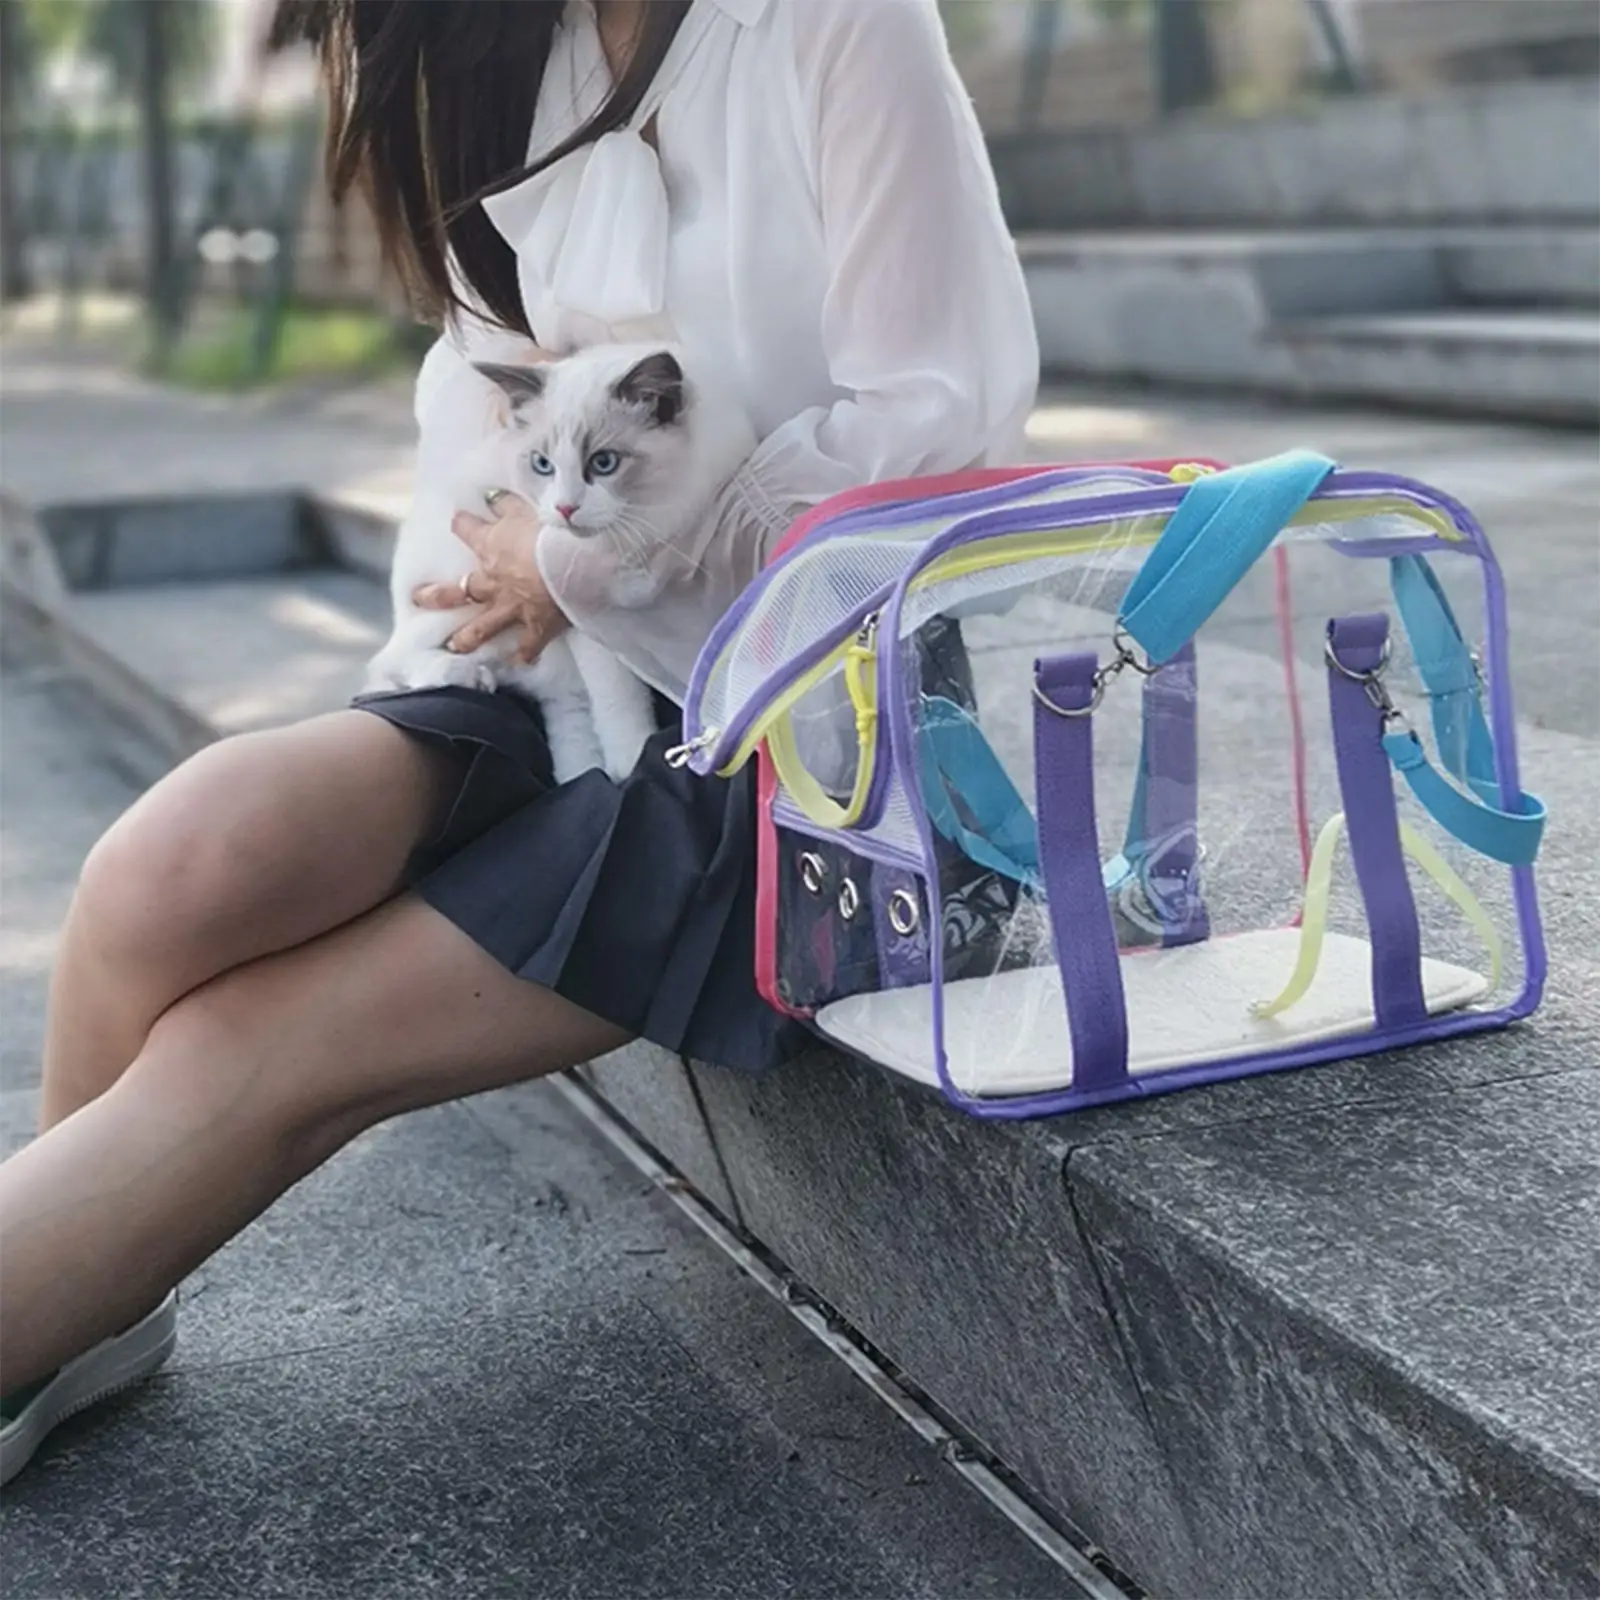 Breathable Pets Transport Bags Cats Ventilated Comfortable Durable Portable Pet Travel Carrier Cat Carrier for Holiday Travel